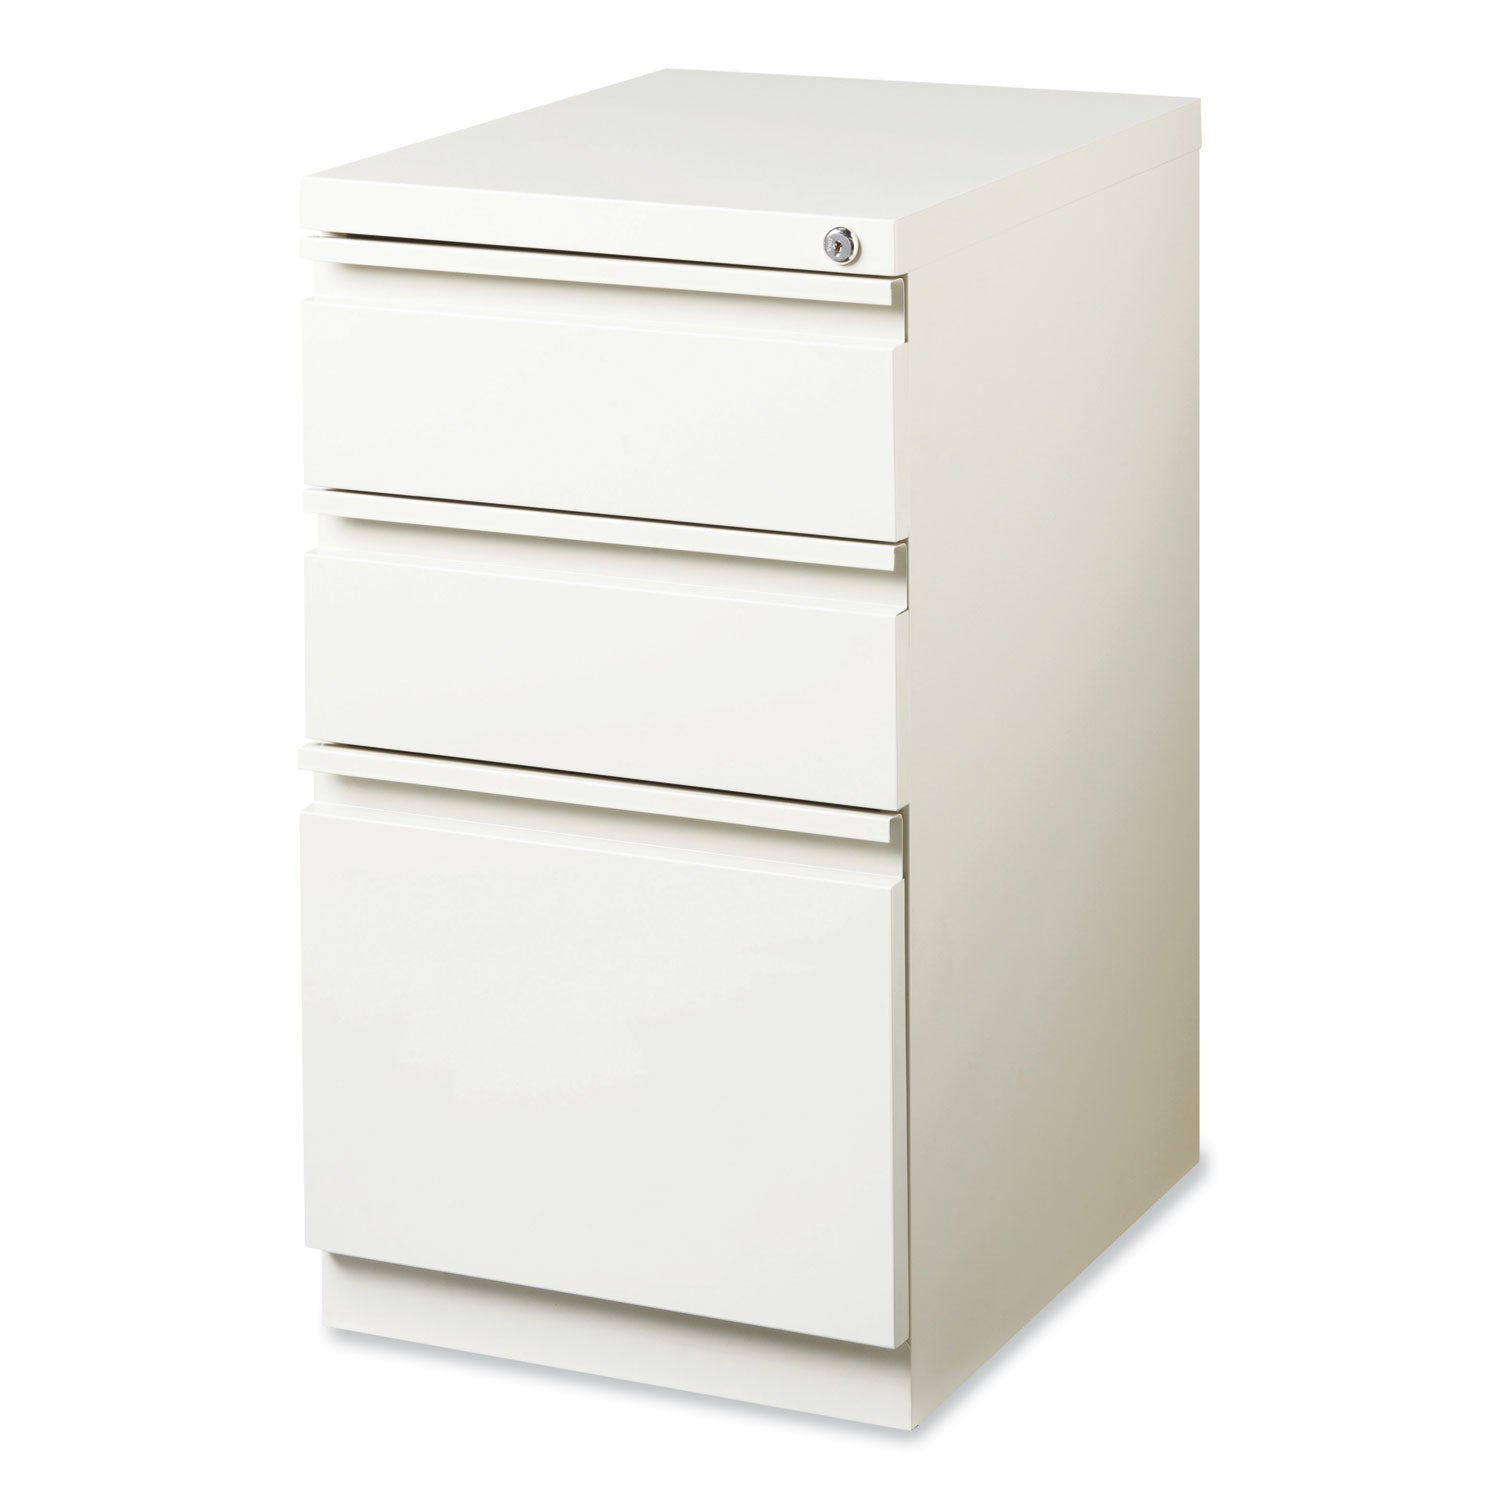 full-width-pull-20-deep-mobile-pedestal-file-box-box-file-letter-white-15-x-1988-x-2775-ships-in-4-6-business-days_hid19353 - 3